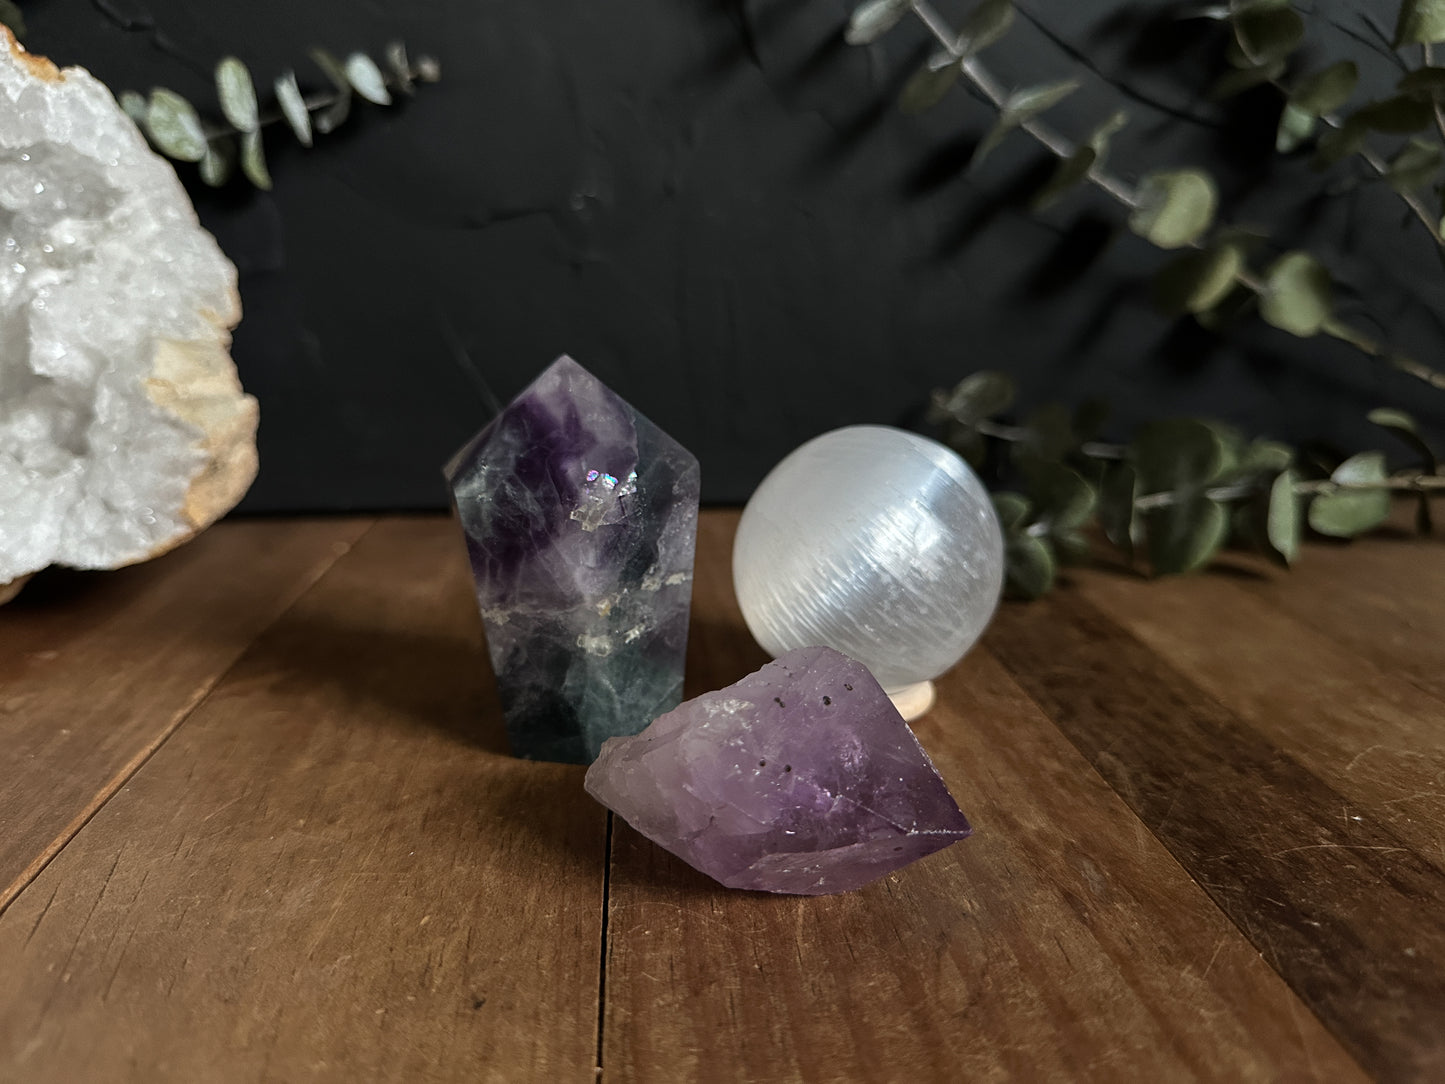 Enhance your focus with our Crystal Focus Kit, featuring three powerful stones: Amethyst, Fluorite, and Selenite.